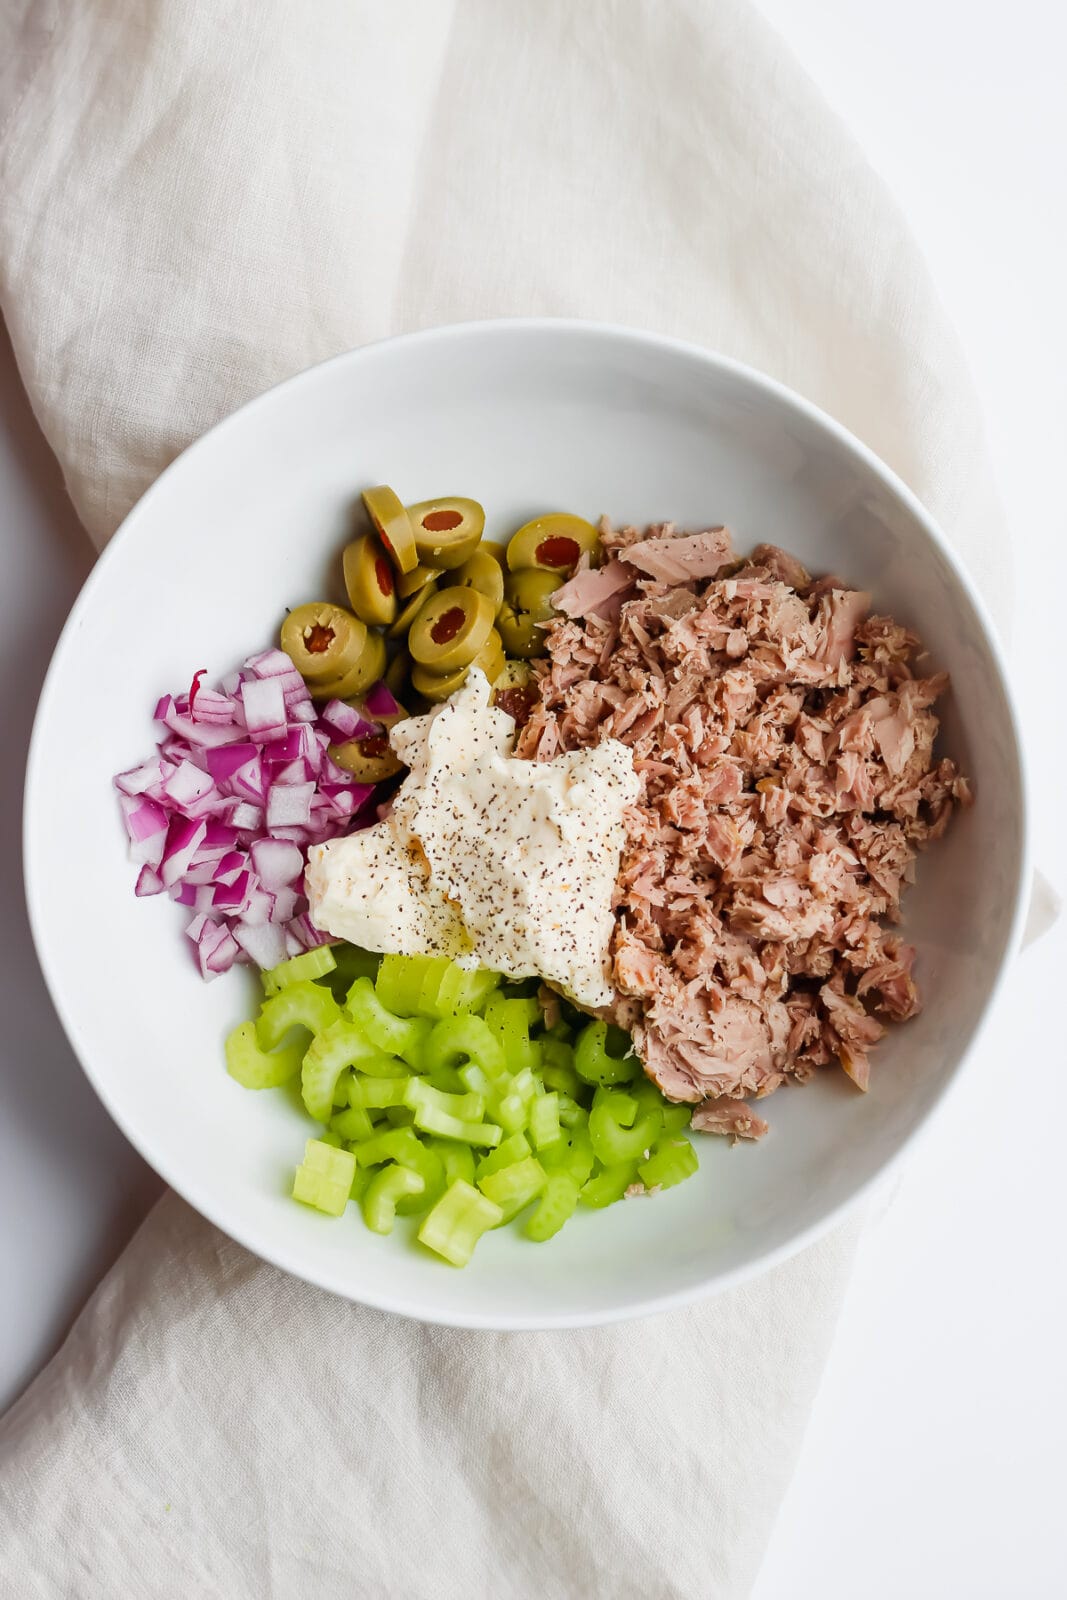 My Favorite Tuna Salad with Avocado - the perfect lunch that can be thrown together in 5 minutes! #whole30 #paleo